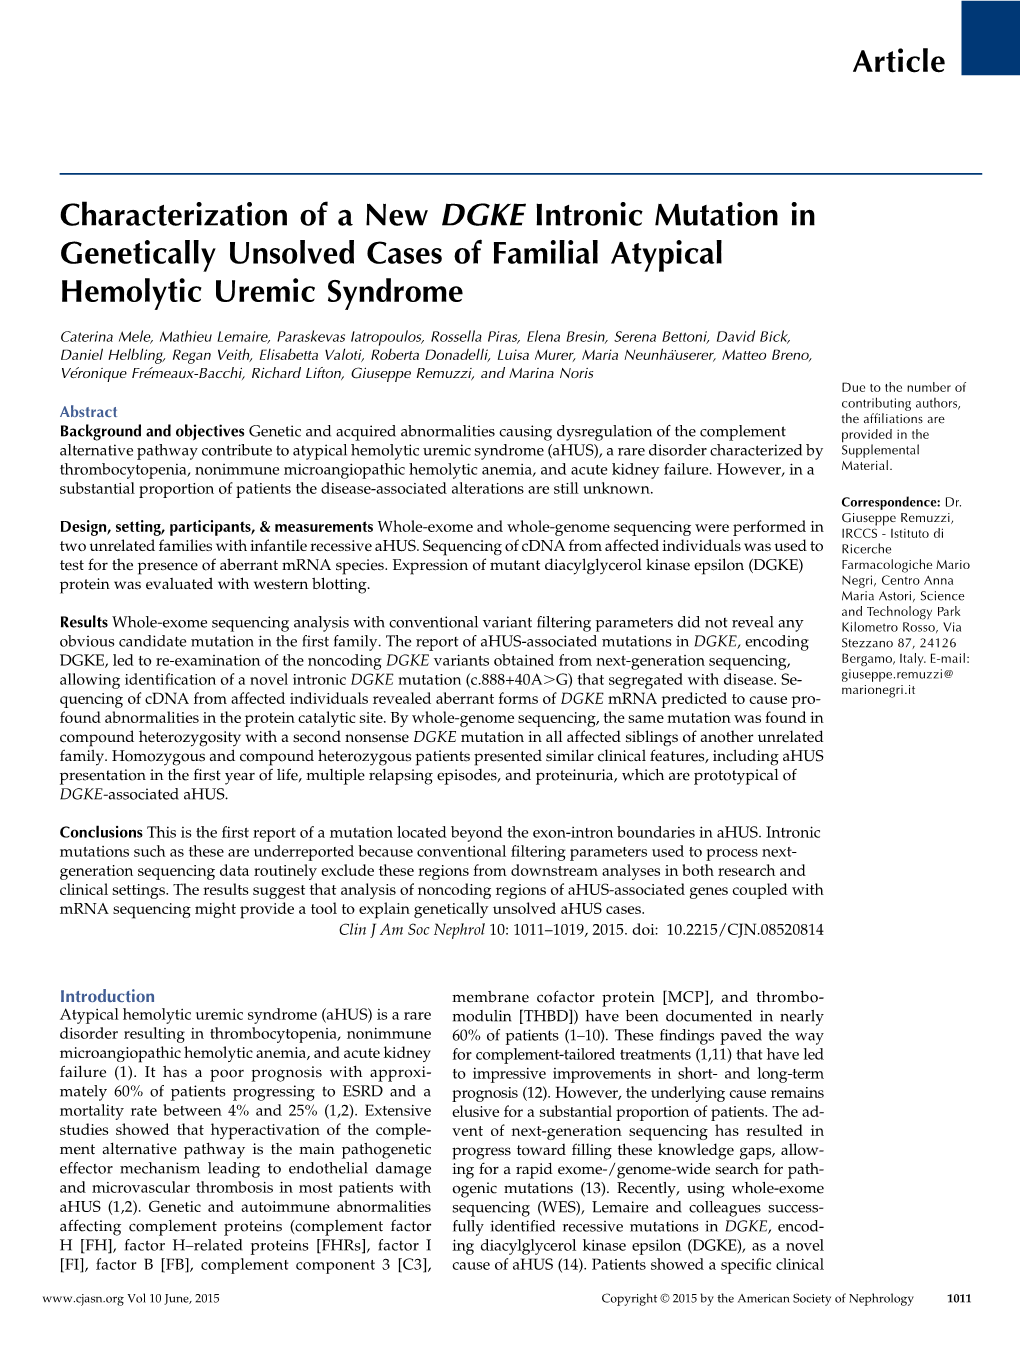 Article Characterization of a New DGKE Intronic Mutation In